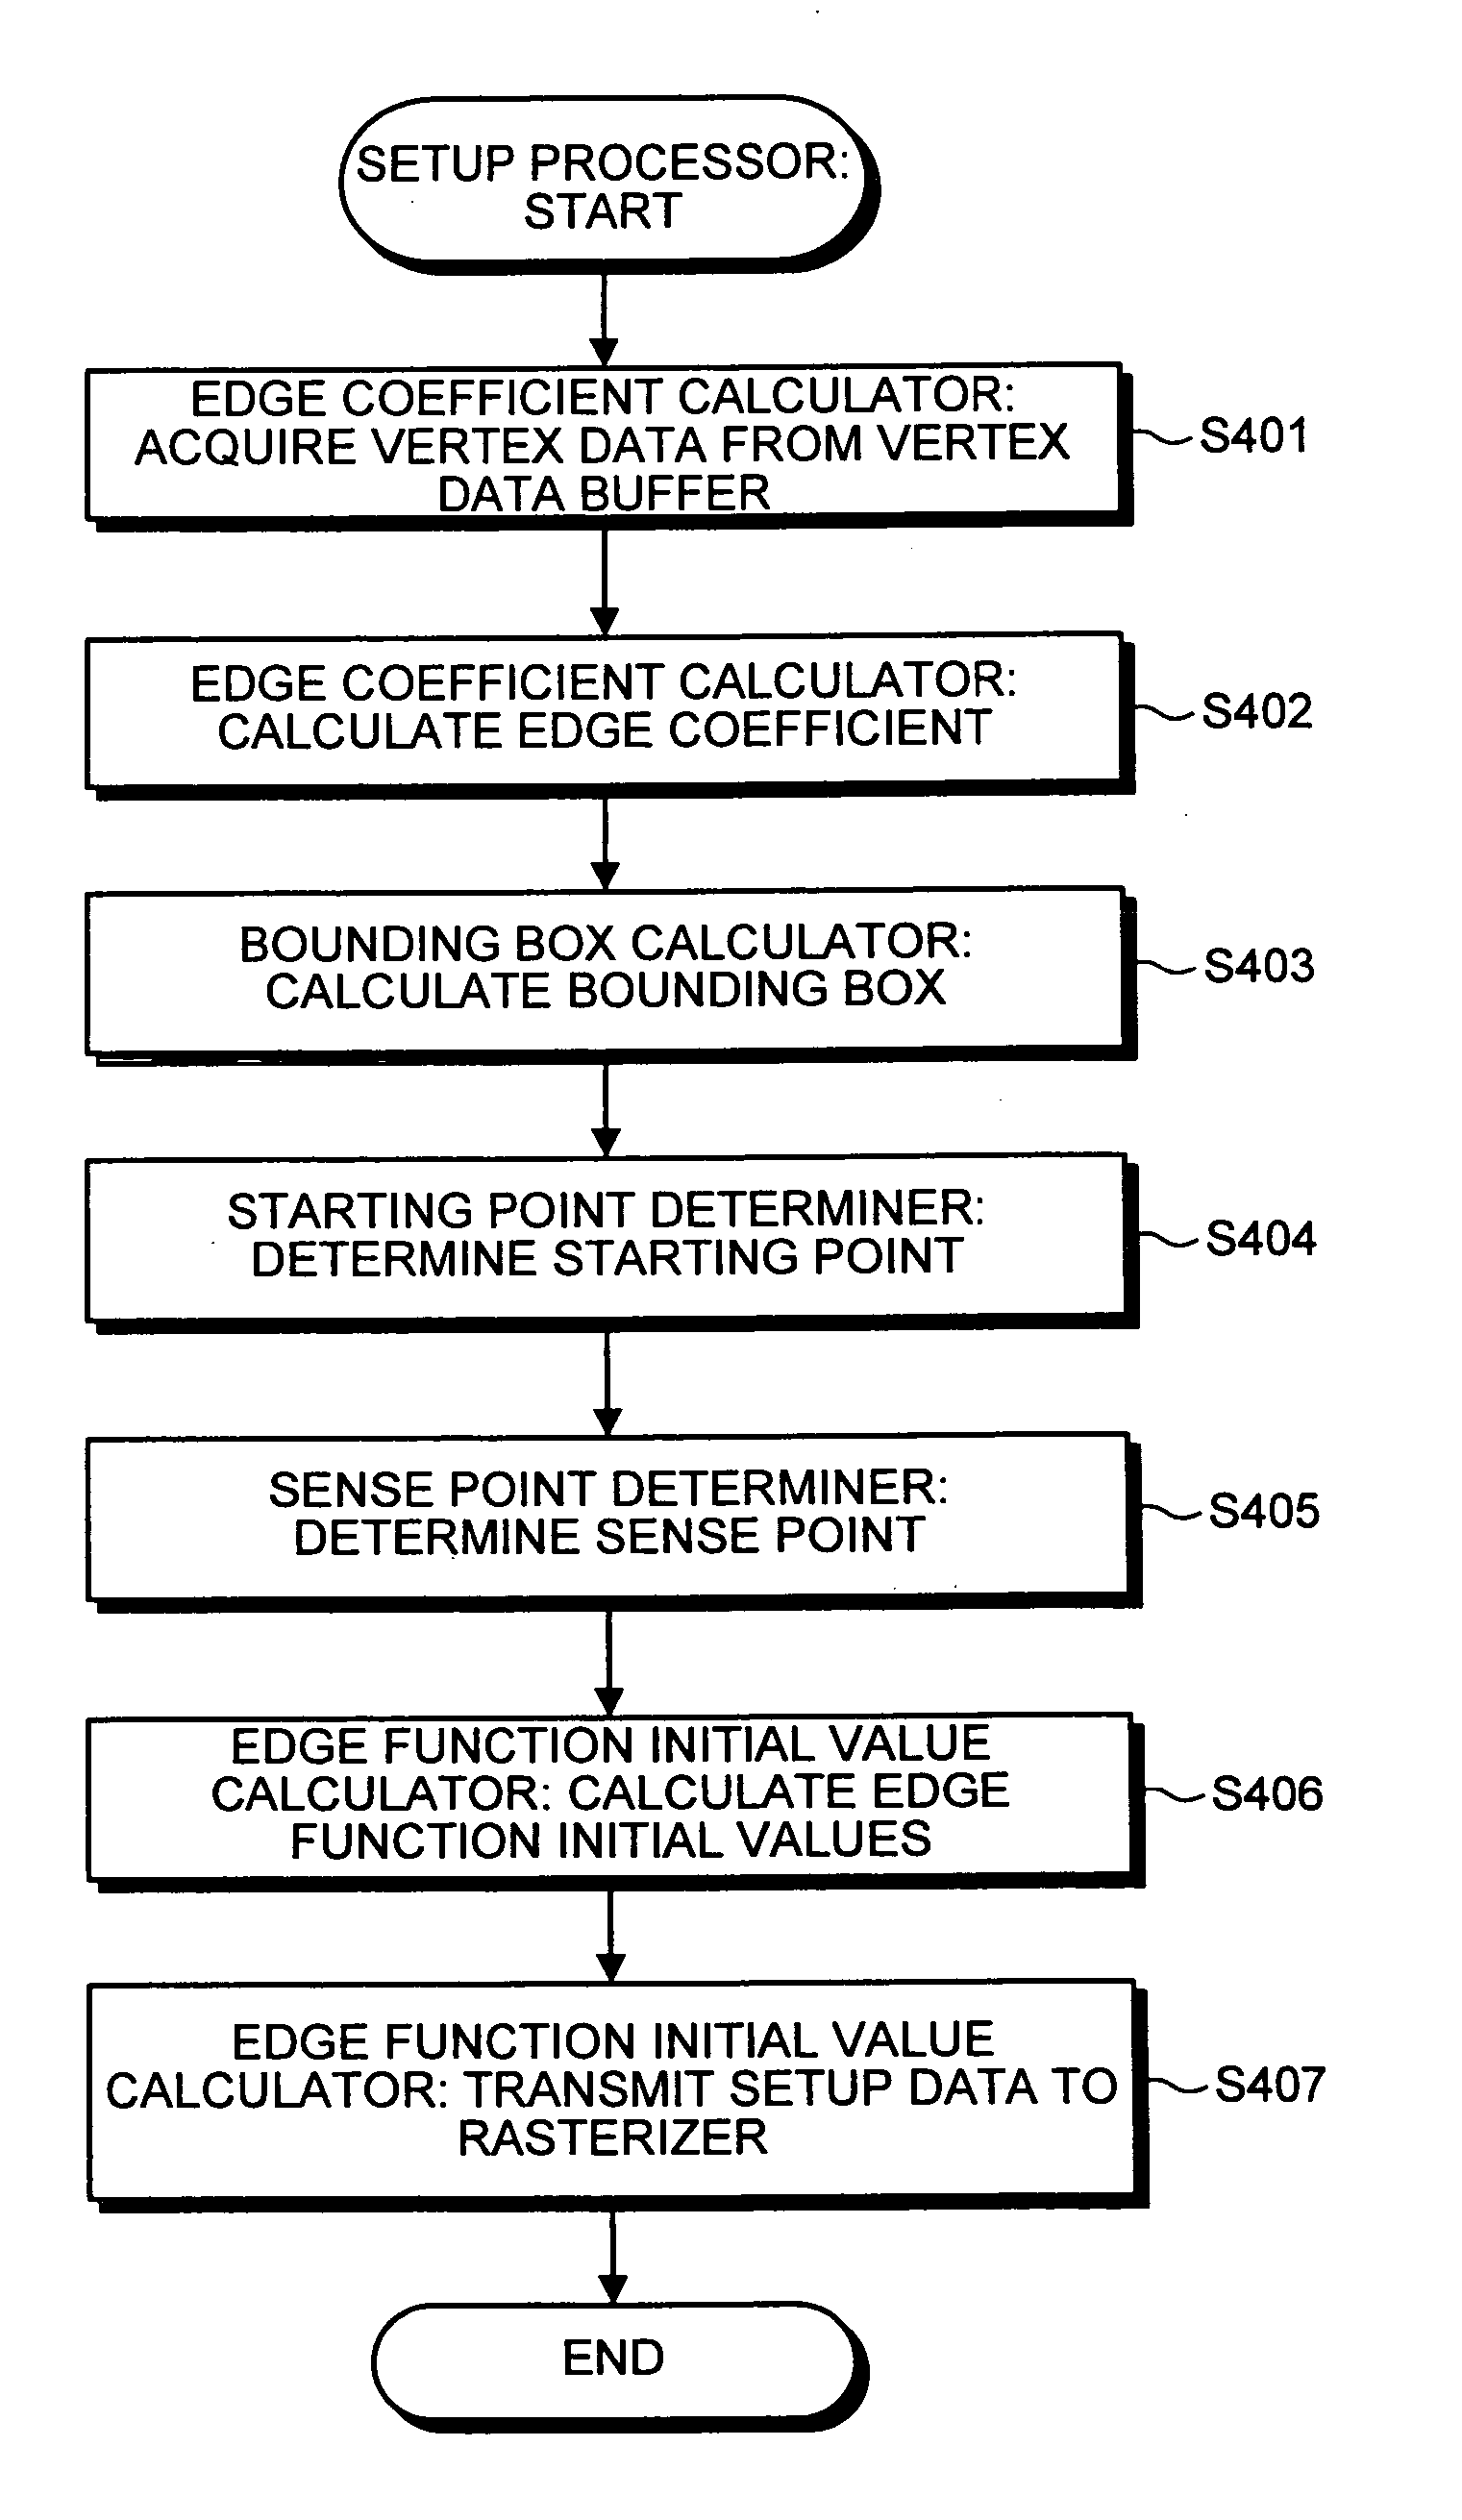 Apparatus of and method for drawing graphics, and computer program product